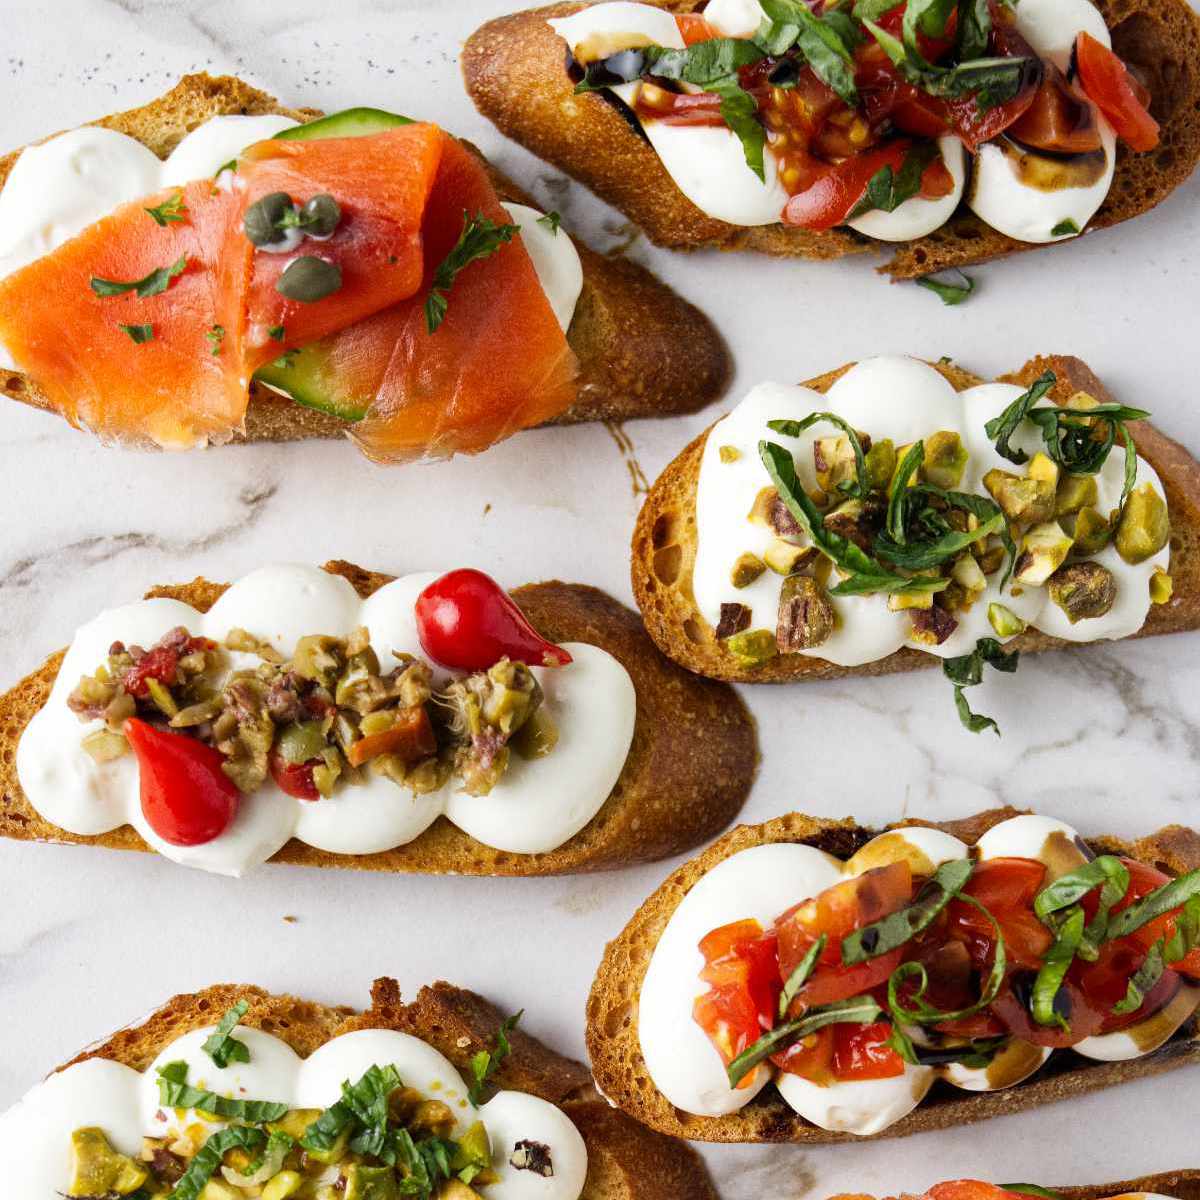 Whipped ricotta crostini topped with smoked salmon, tomatoes and basil, and olive tapenade.